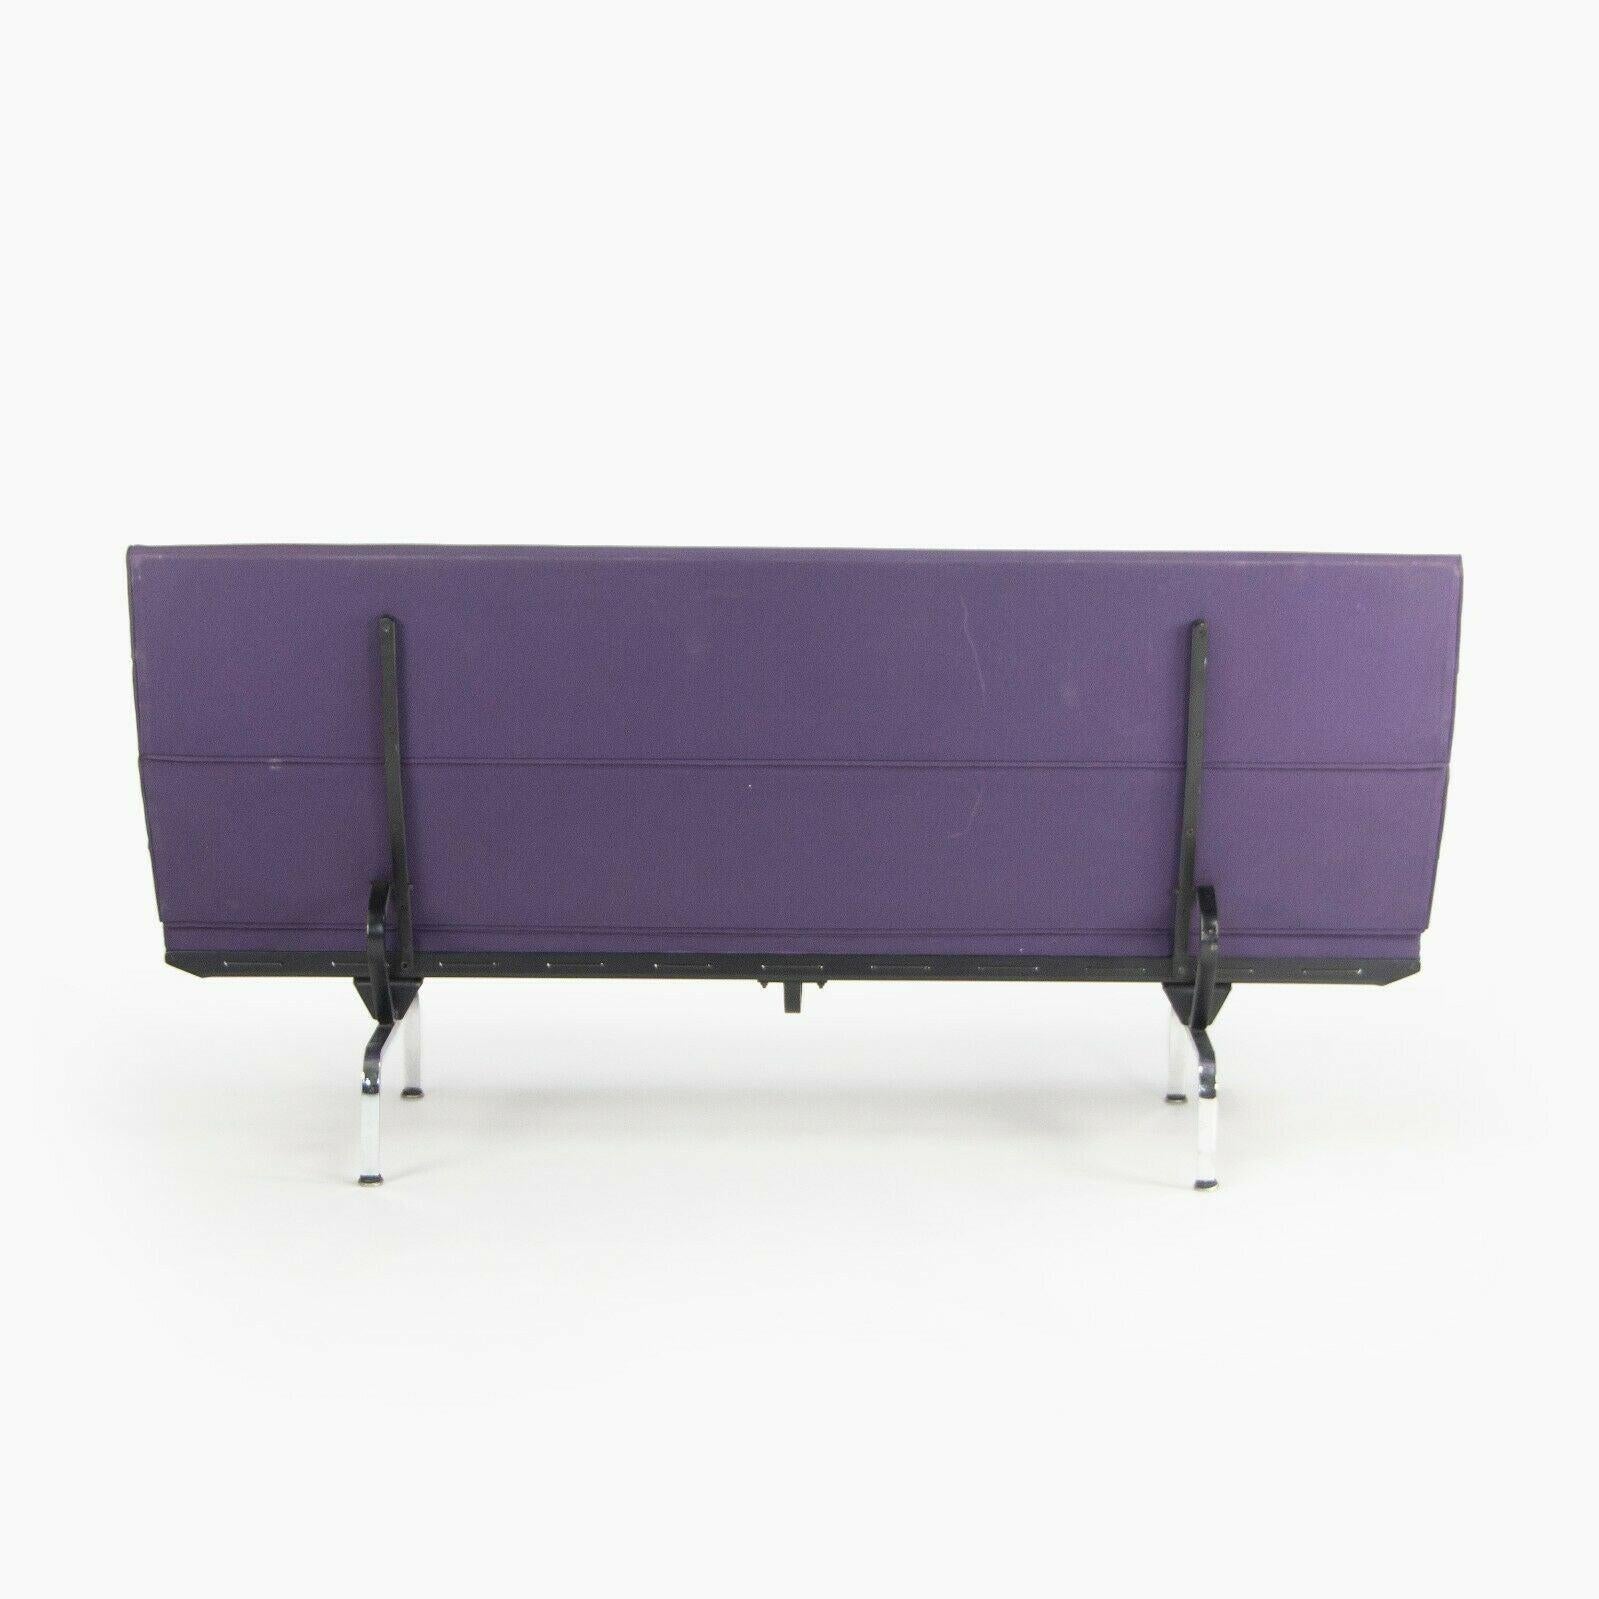 Moderne 2006 Herman Miller Ray and Charles Eames Sofa Compact Purple Fabric Upholstery (Canapé compact en tissu violet) en vente